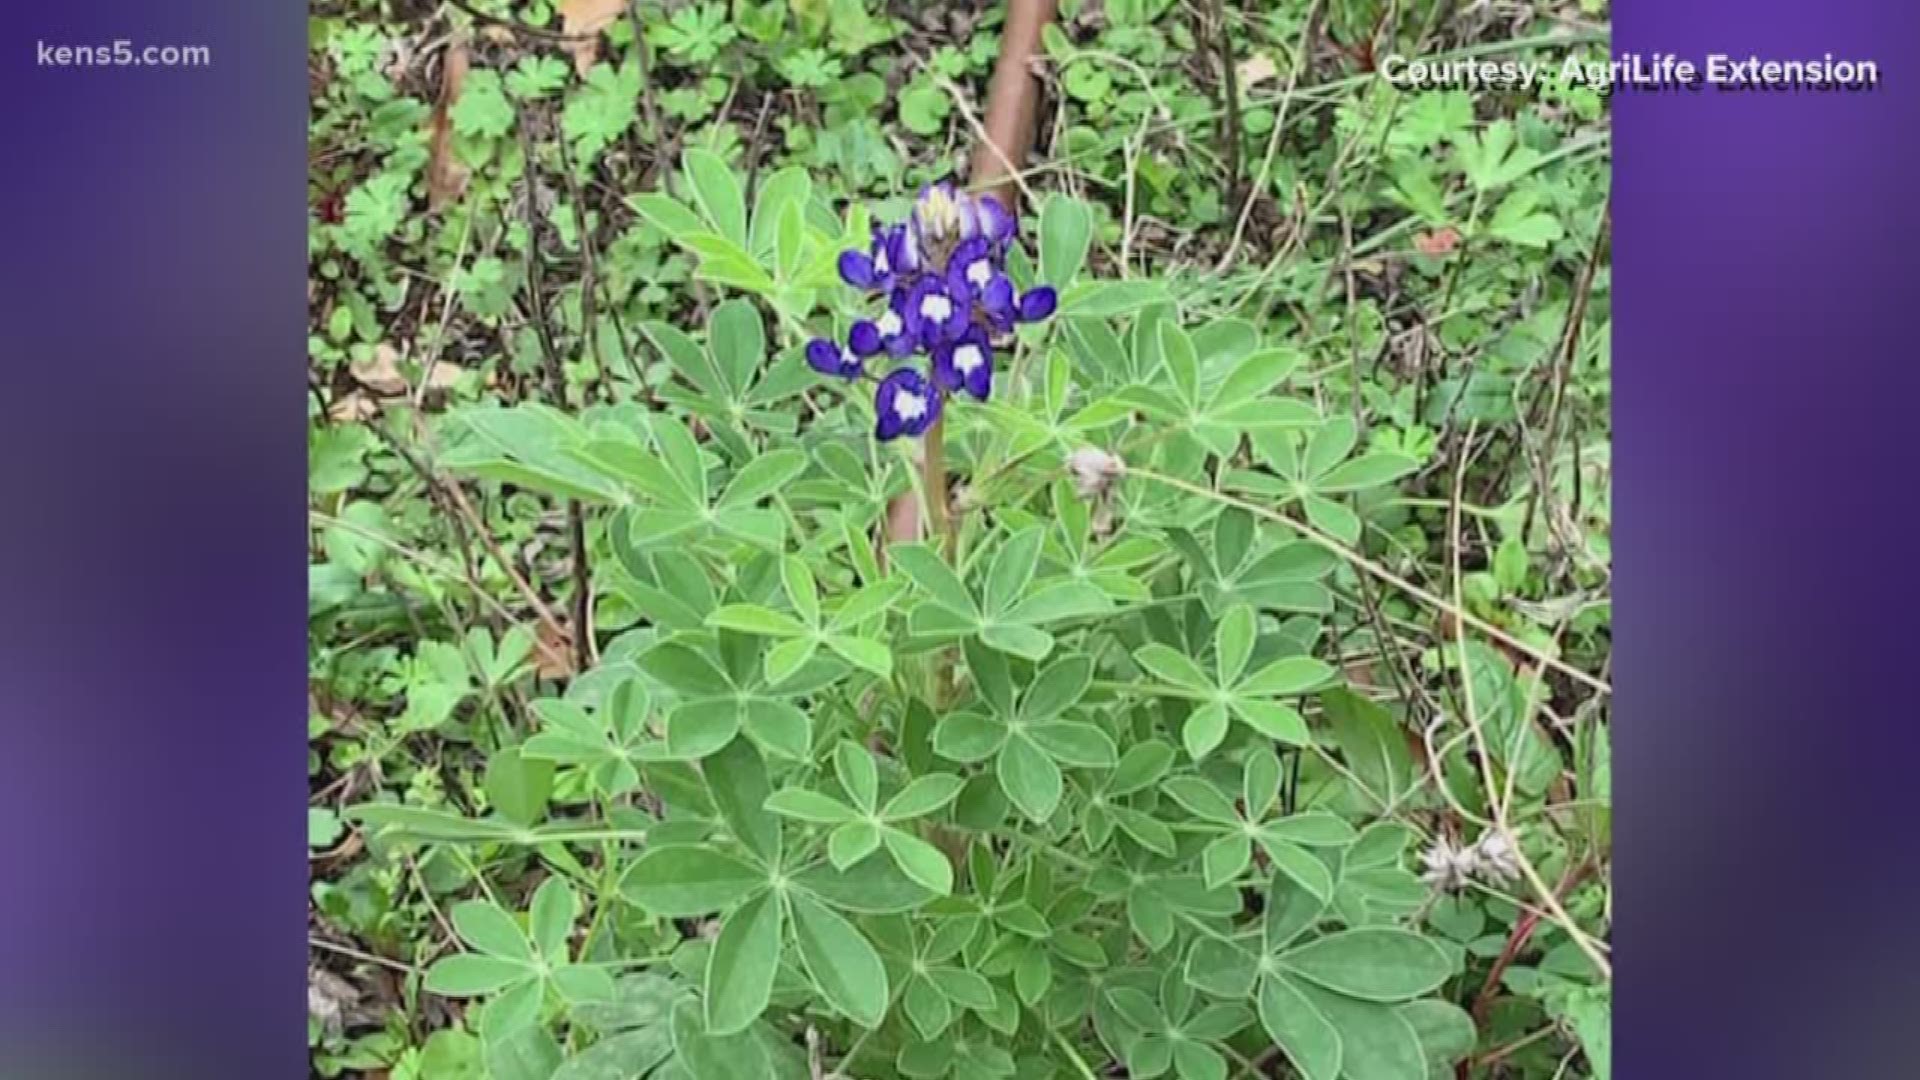 We're still a few months away from peak bluebonnet season-- but a few of the blooms have been spotted around the Hill Country.